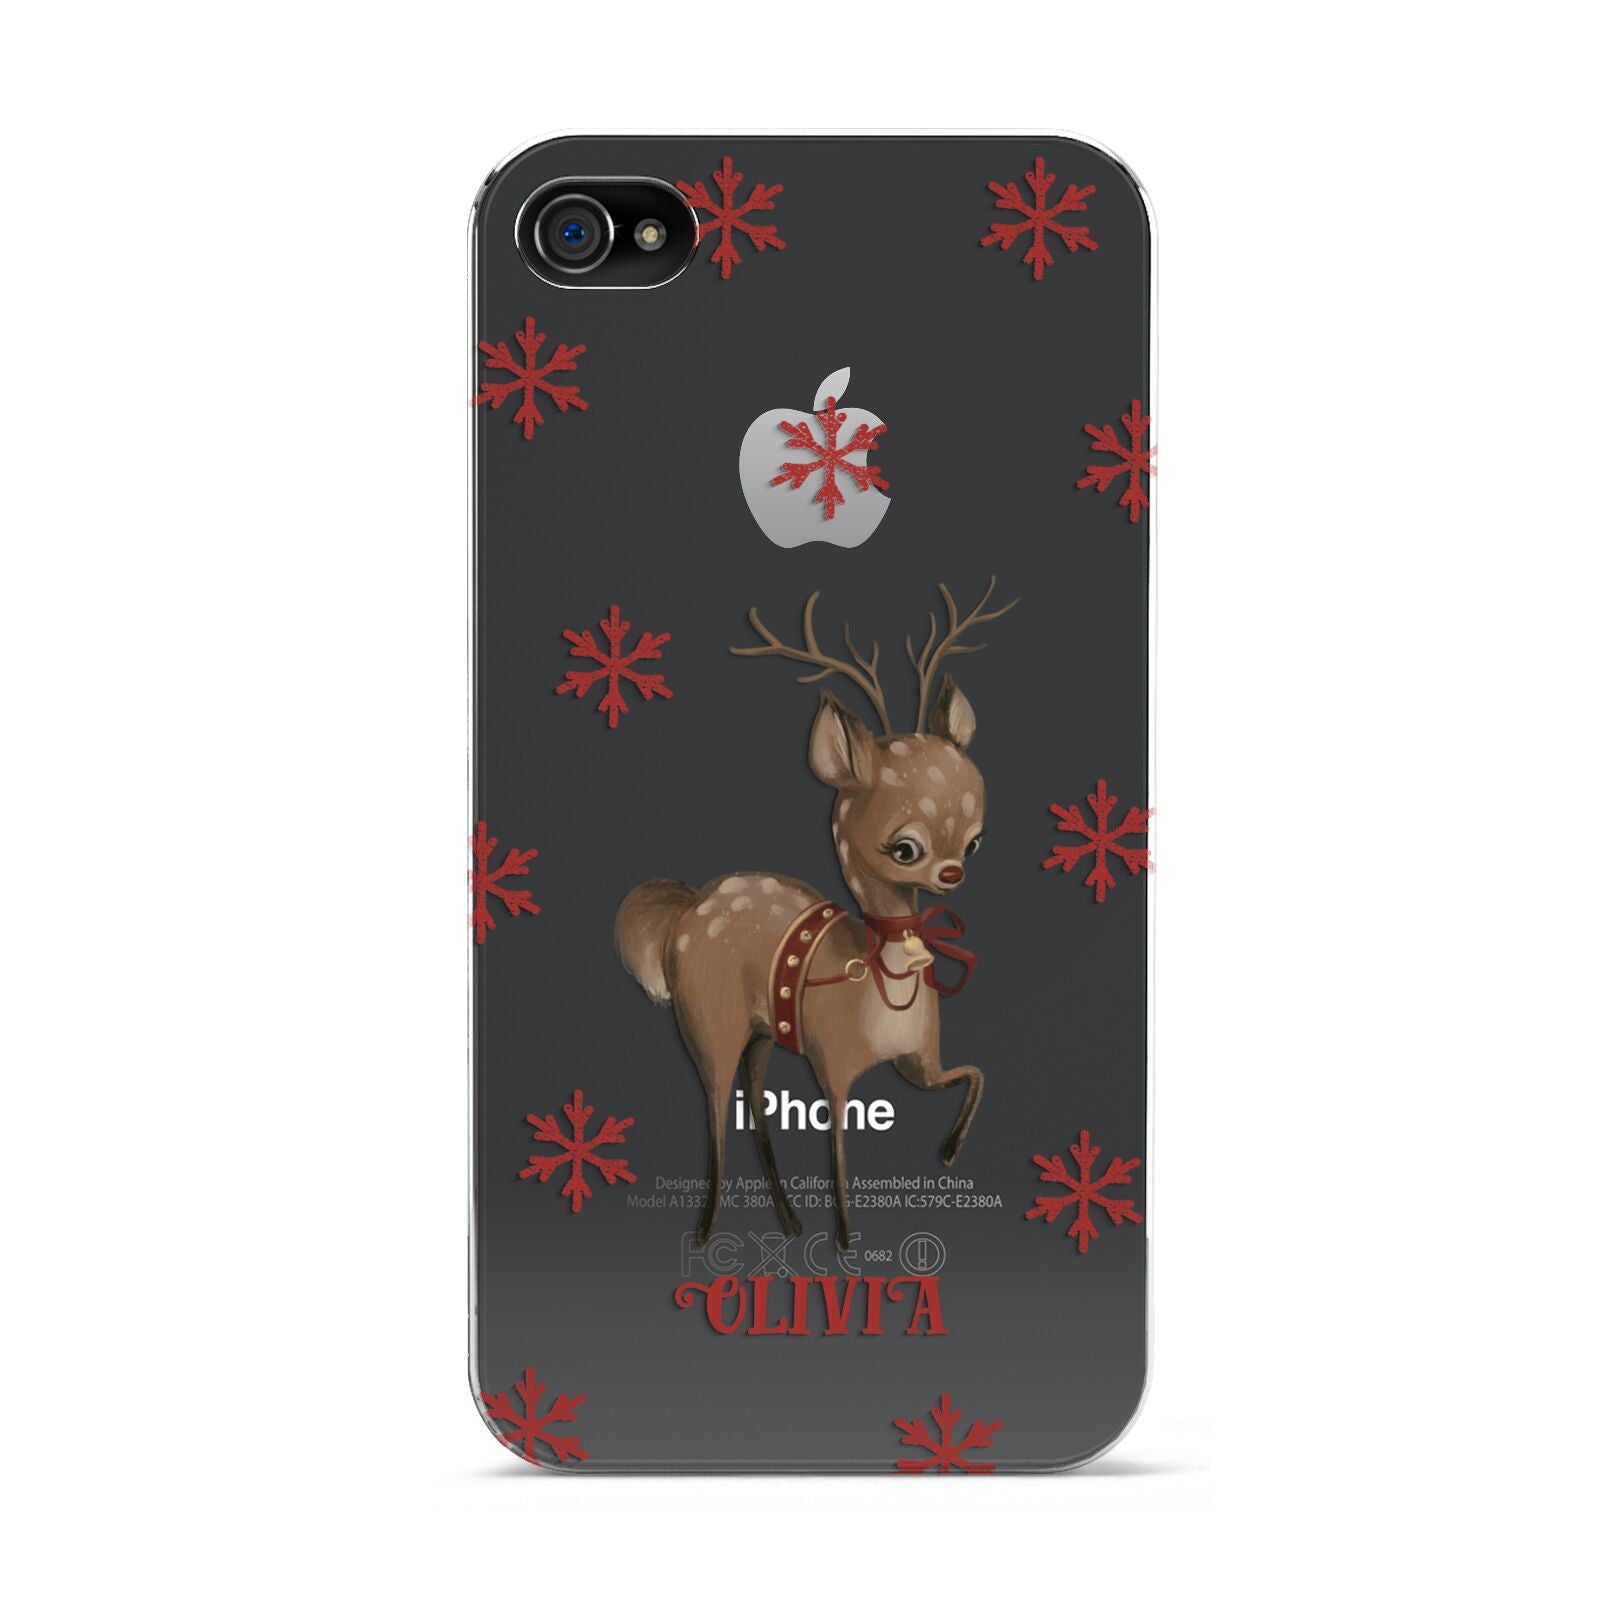 Rudolph Delivery Apple iPhone 4s Case